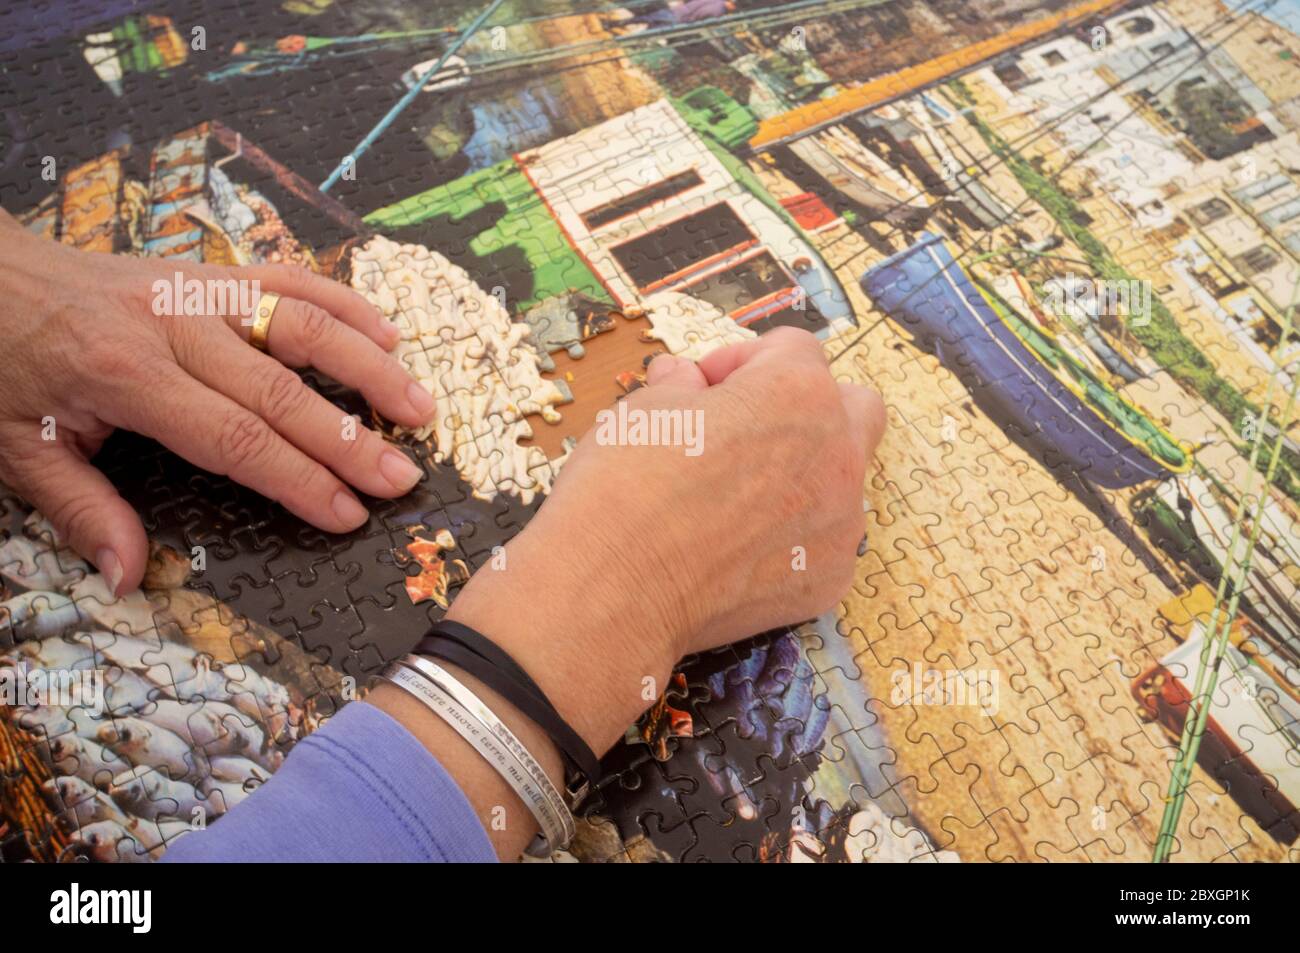 Focused on assembling a puzzle Stock Photo